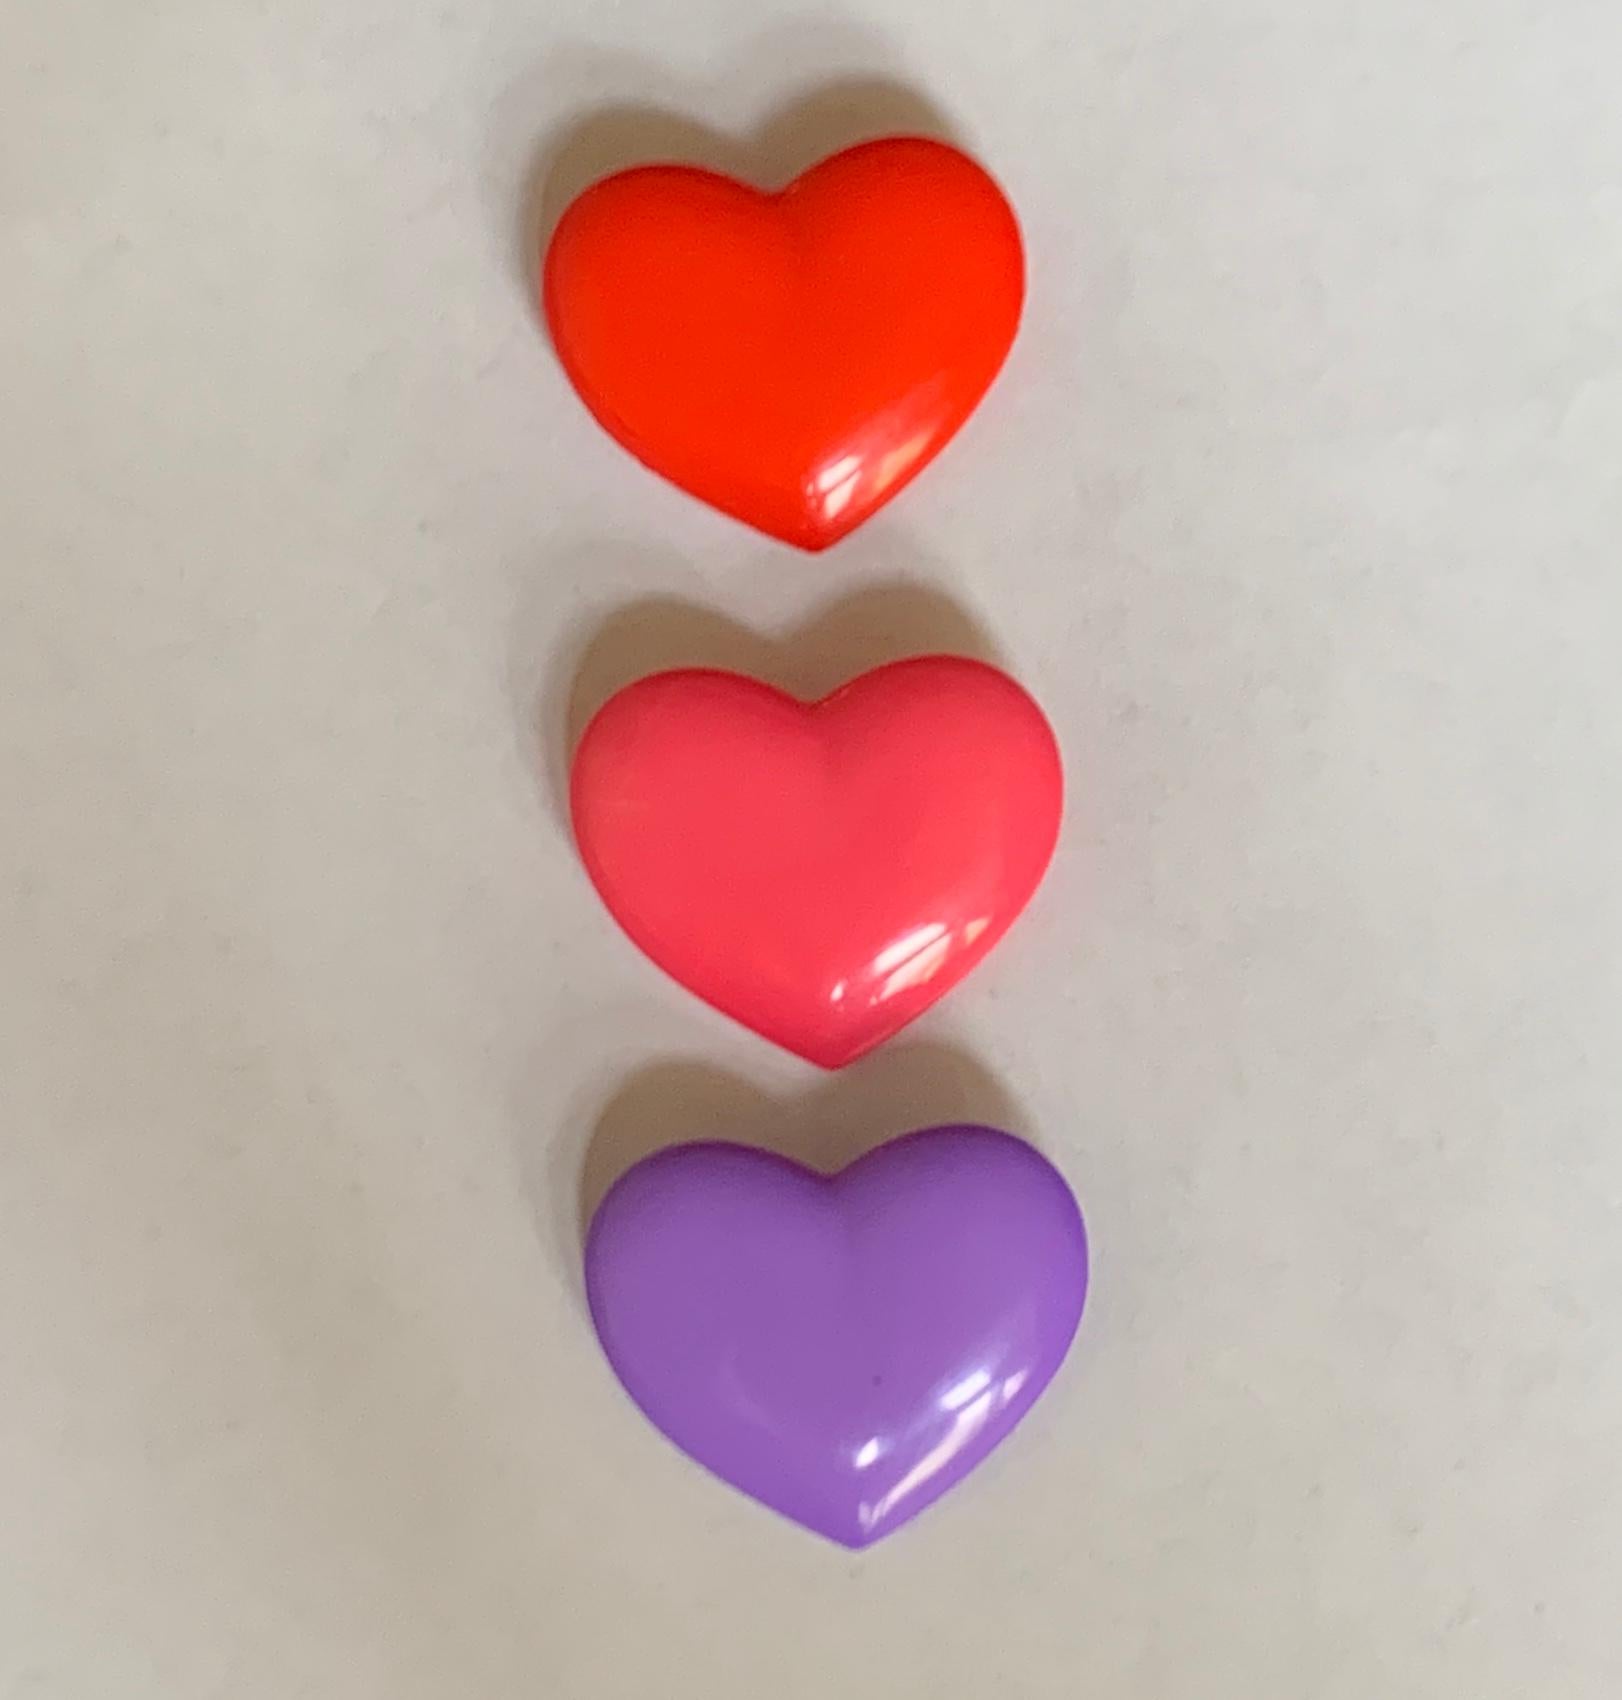 Set of three Patrick Kelly for Streamline vintage 1980s plastic heart shaped buttons in pink, red, and purple. Single loop at back for threading. (You could also glue a brooch backing on to use the buttons as pins, just like Patrick did!)

Signed